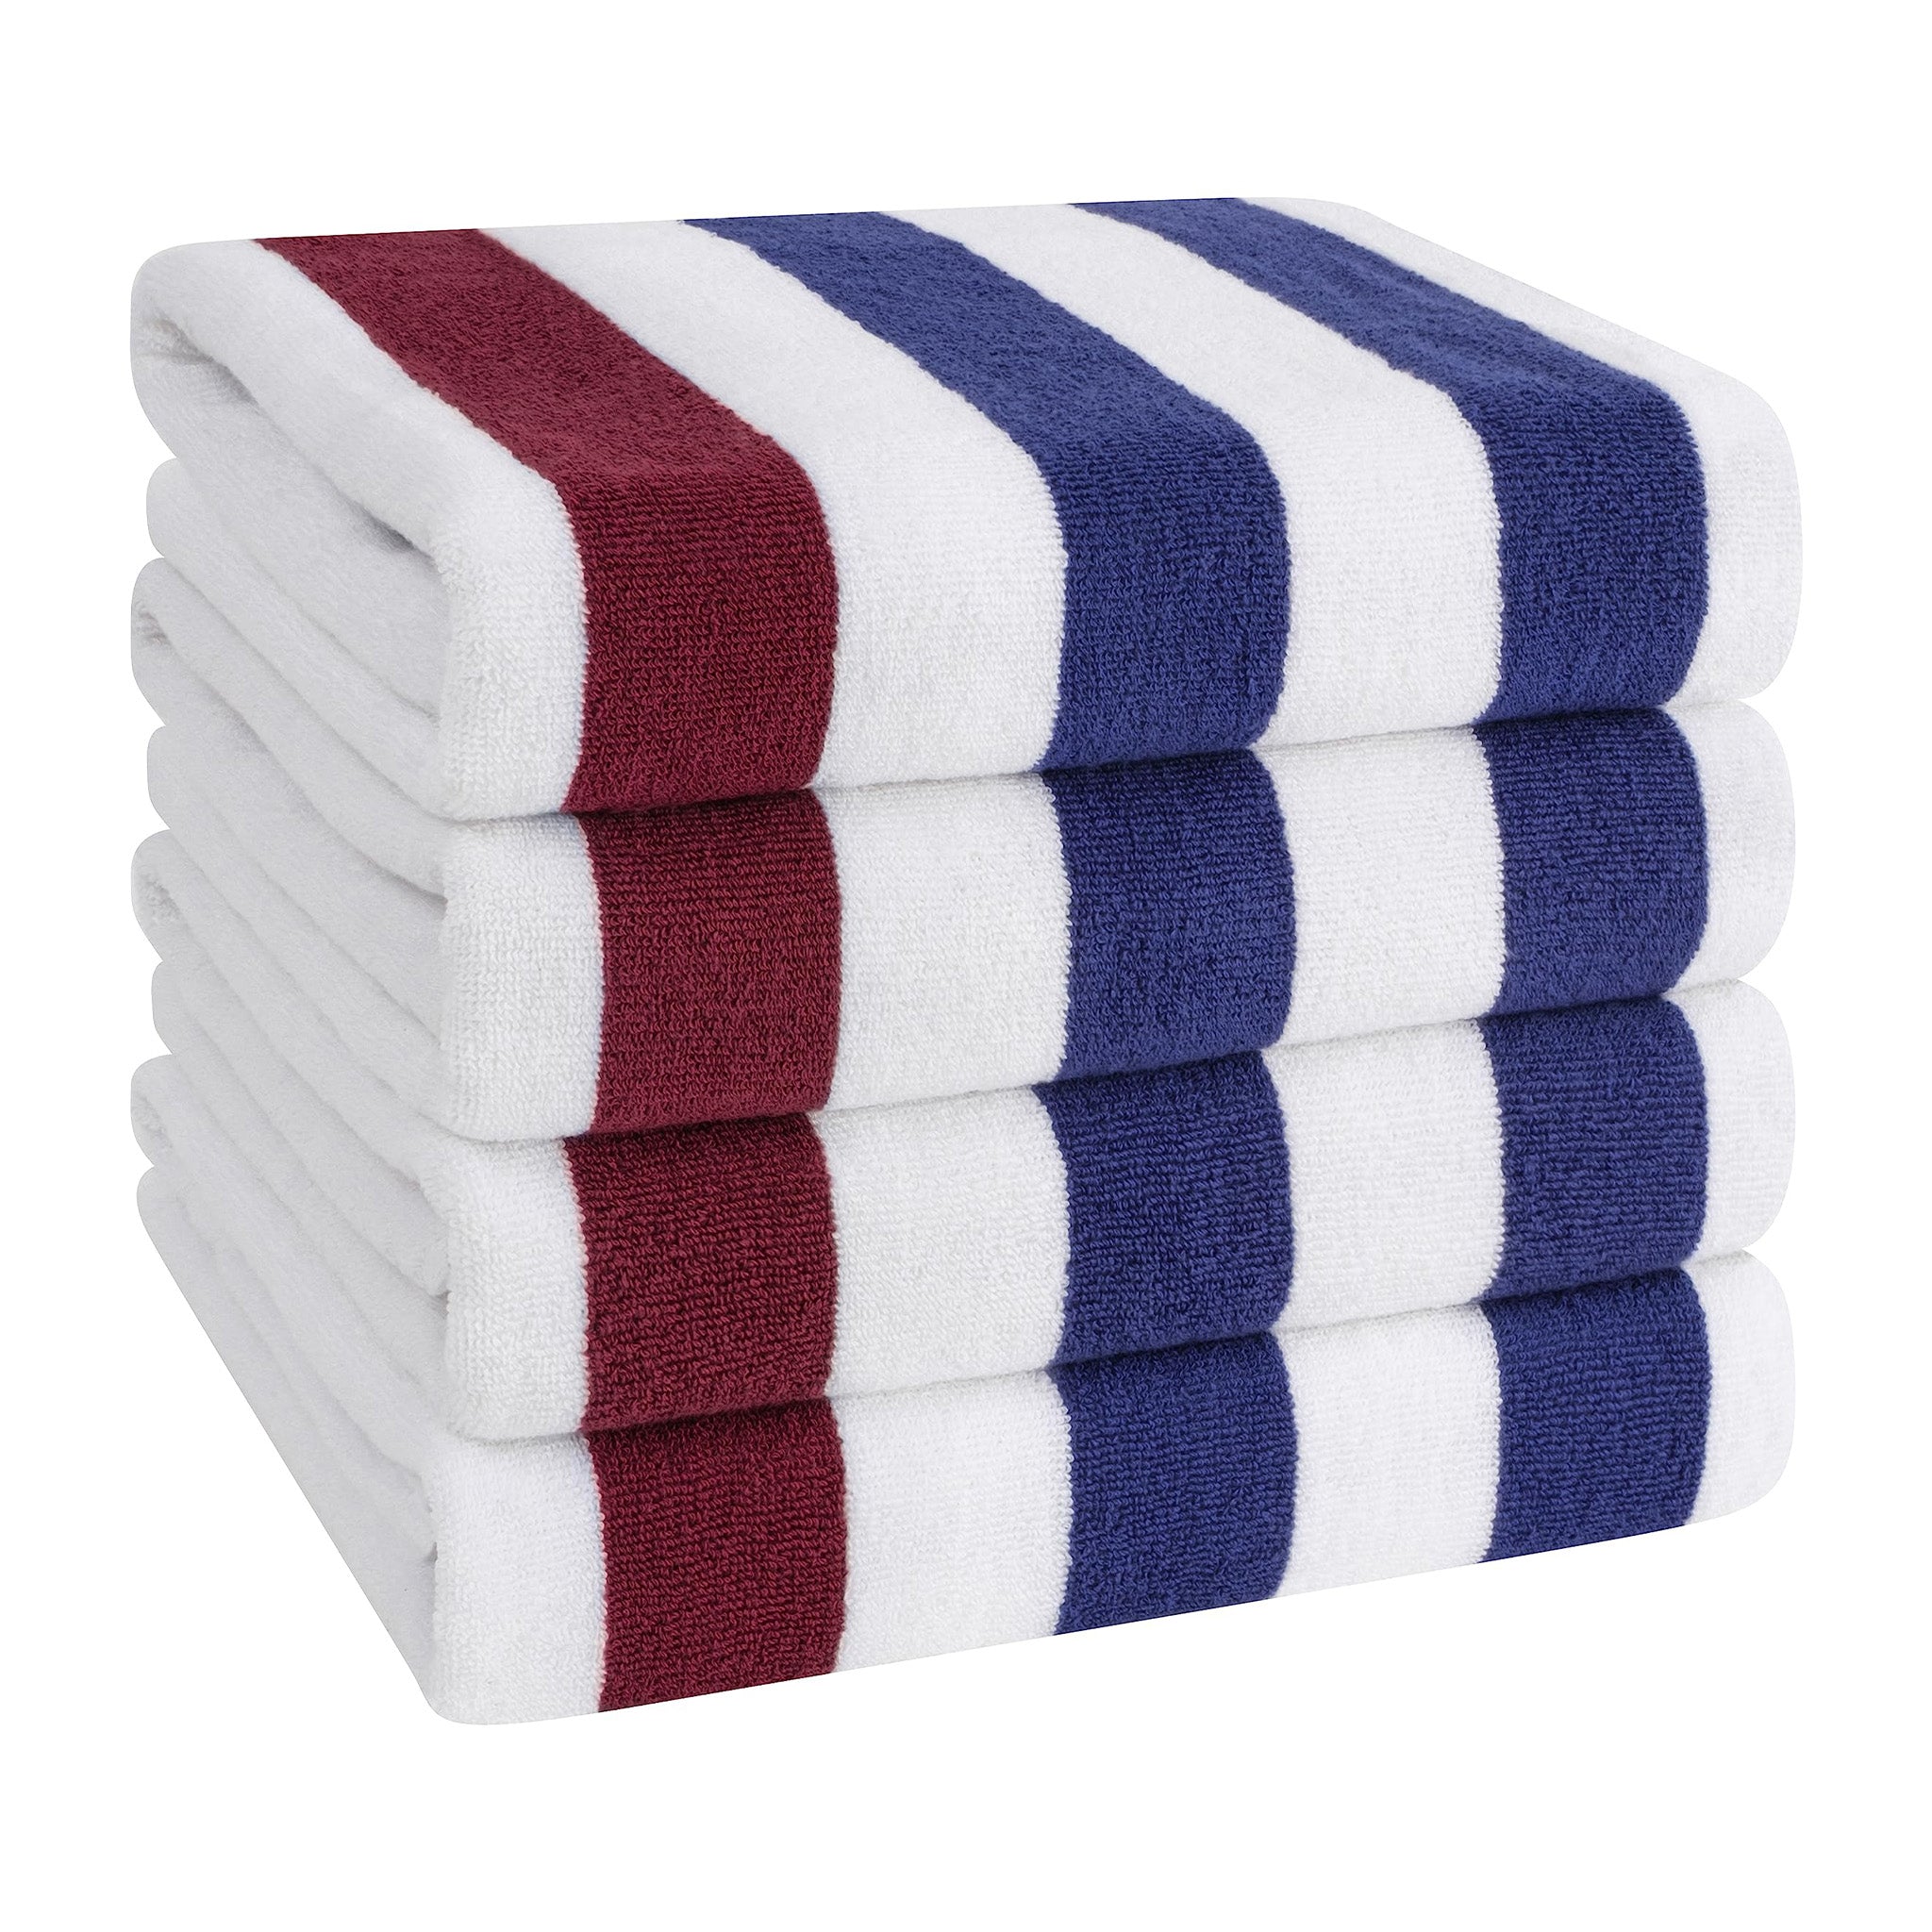 American Soft Linen 100% Cotton 4 Pack Beach Towels Cabana Striped Pool Towels -navy-bordeaux-1